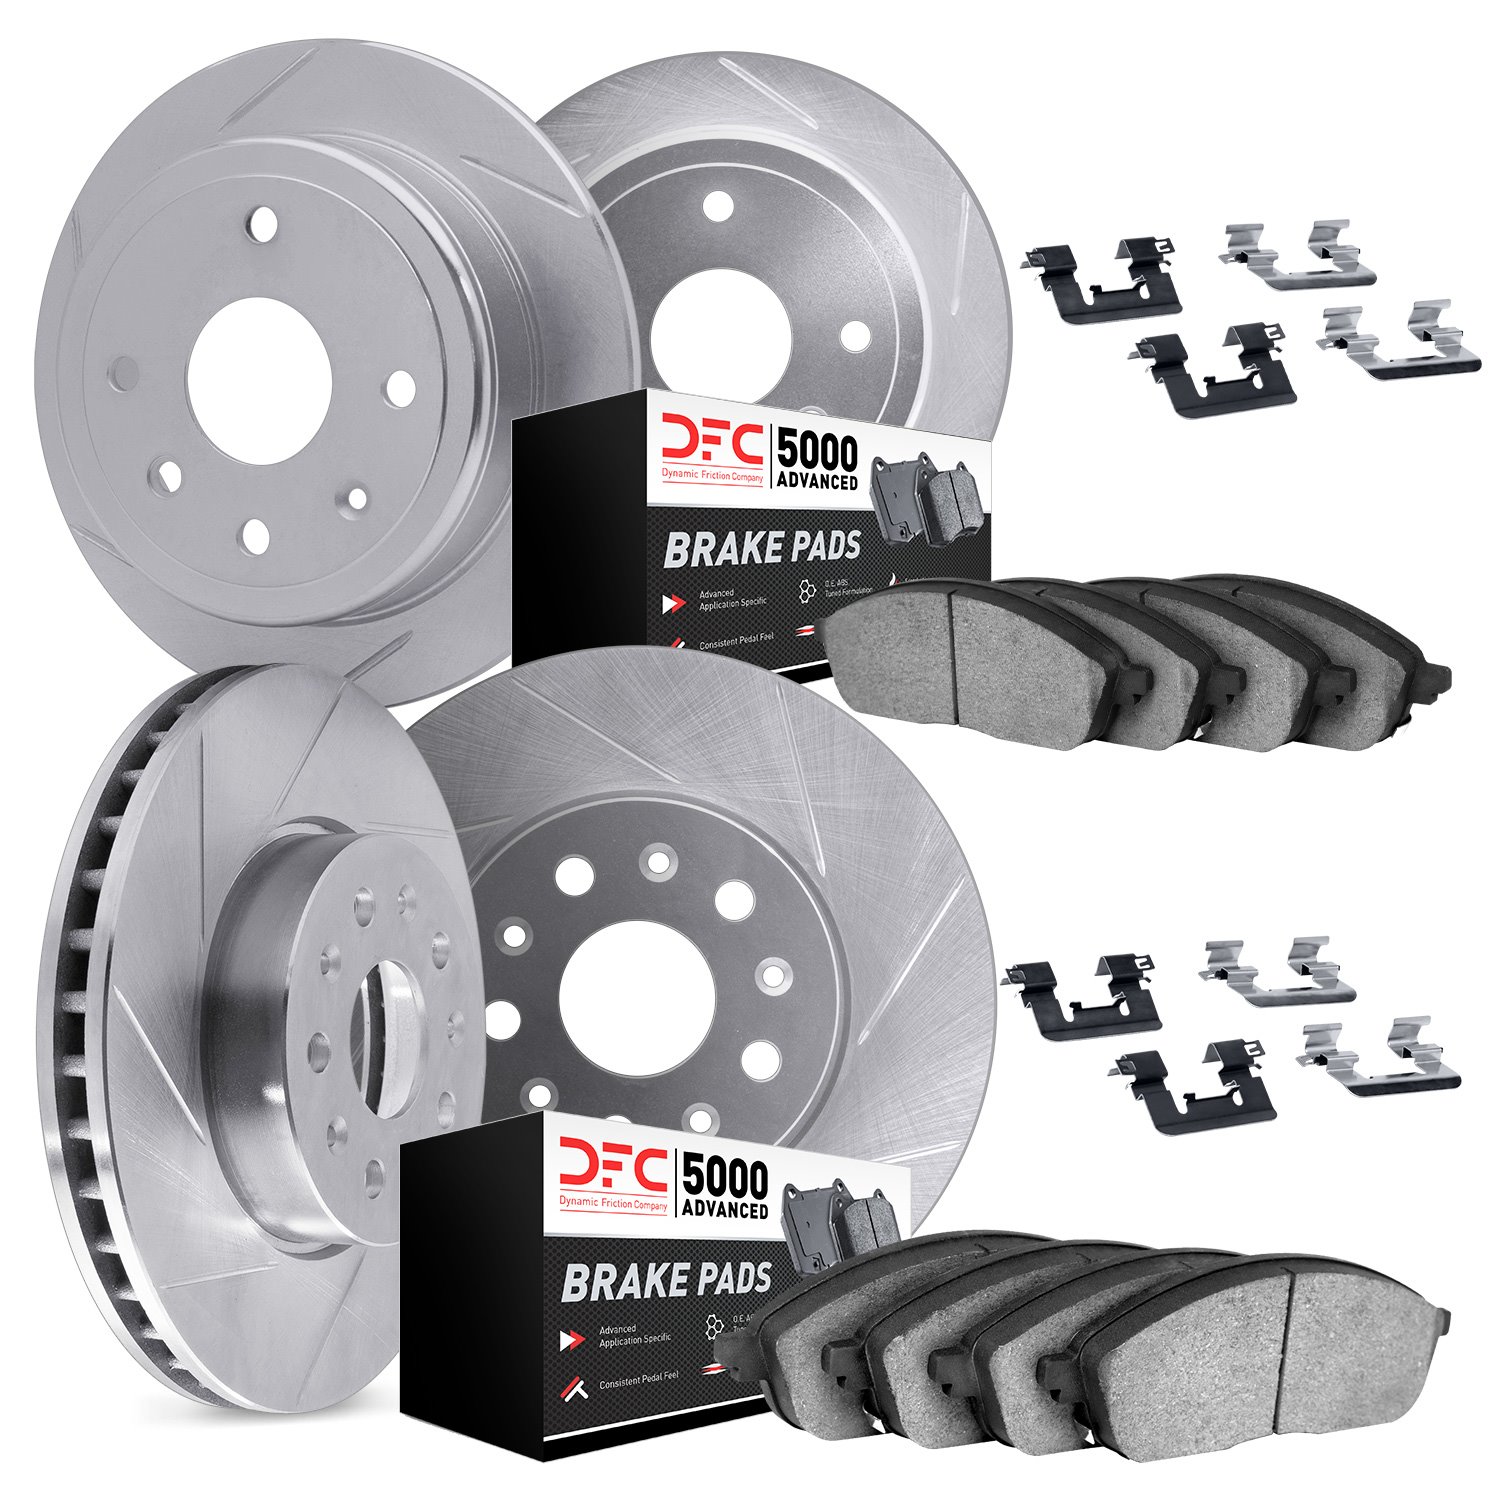 5514-72025 Slotted Brake Rotors w/5000 Advanced Brake Pads Kit & Hardware [Silver], 2005-2006 Mitsubishi, Position: Front and Re